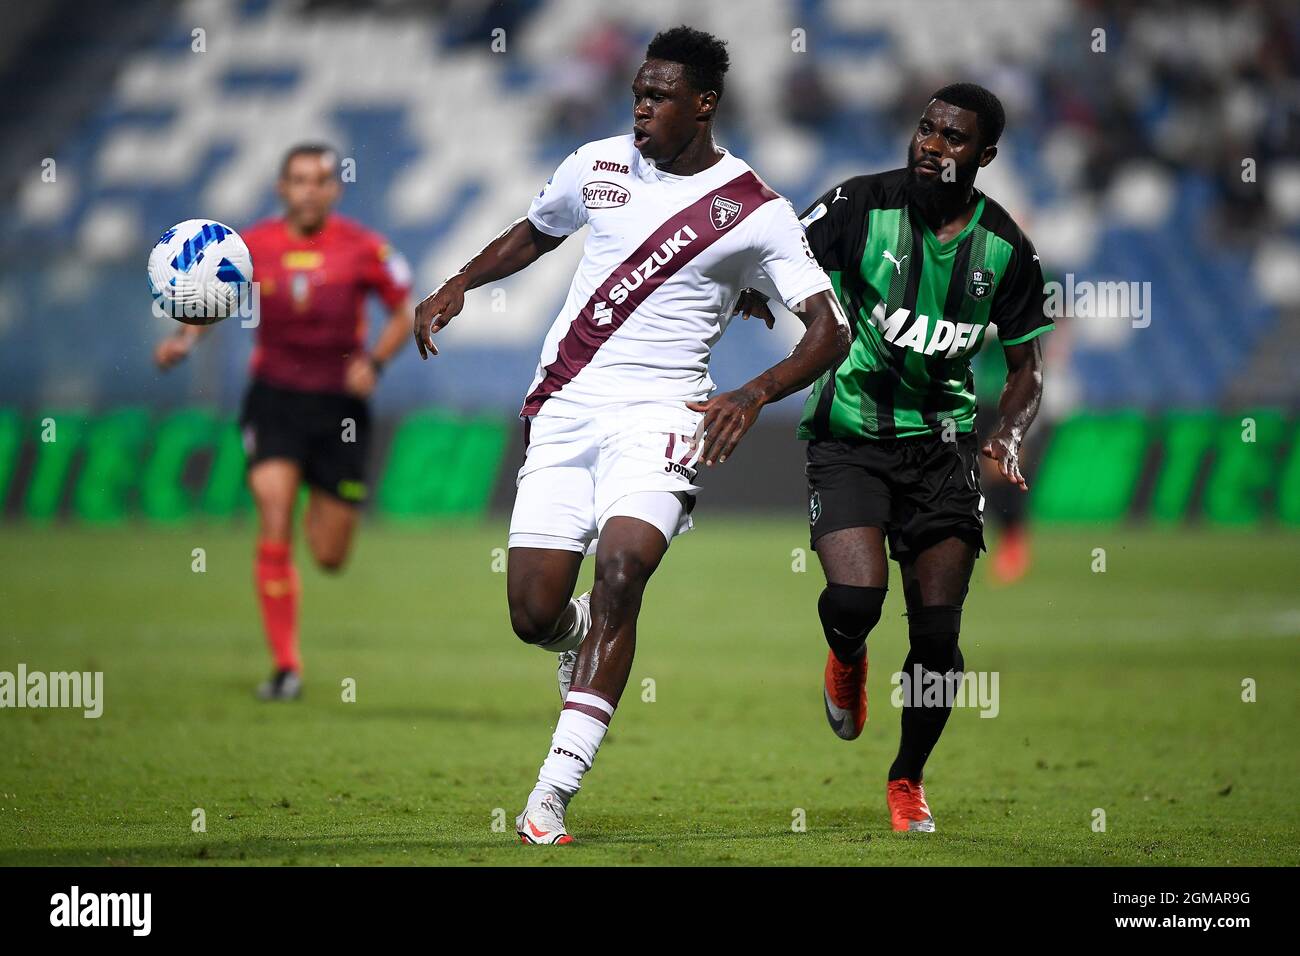 Reggio Emilia, Italy. 17 September 2021. Wilfried Singo (L) of Torino FC competes for the ball with Jeremie Boga of US Sassuolo during the Serie A football match between US Sassuolo and Torino FC. Credit: Nicolò Campo/Alamy Live News Stock Photo